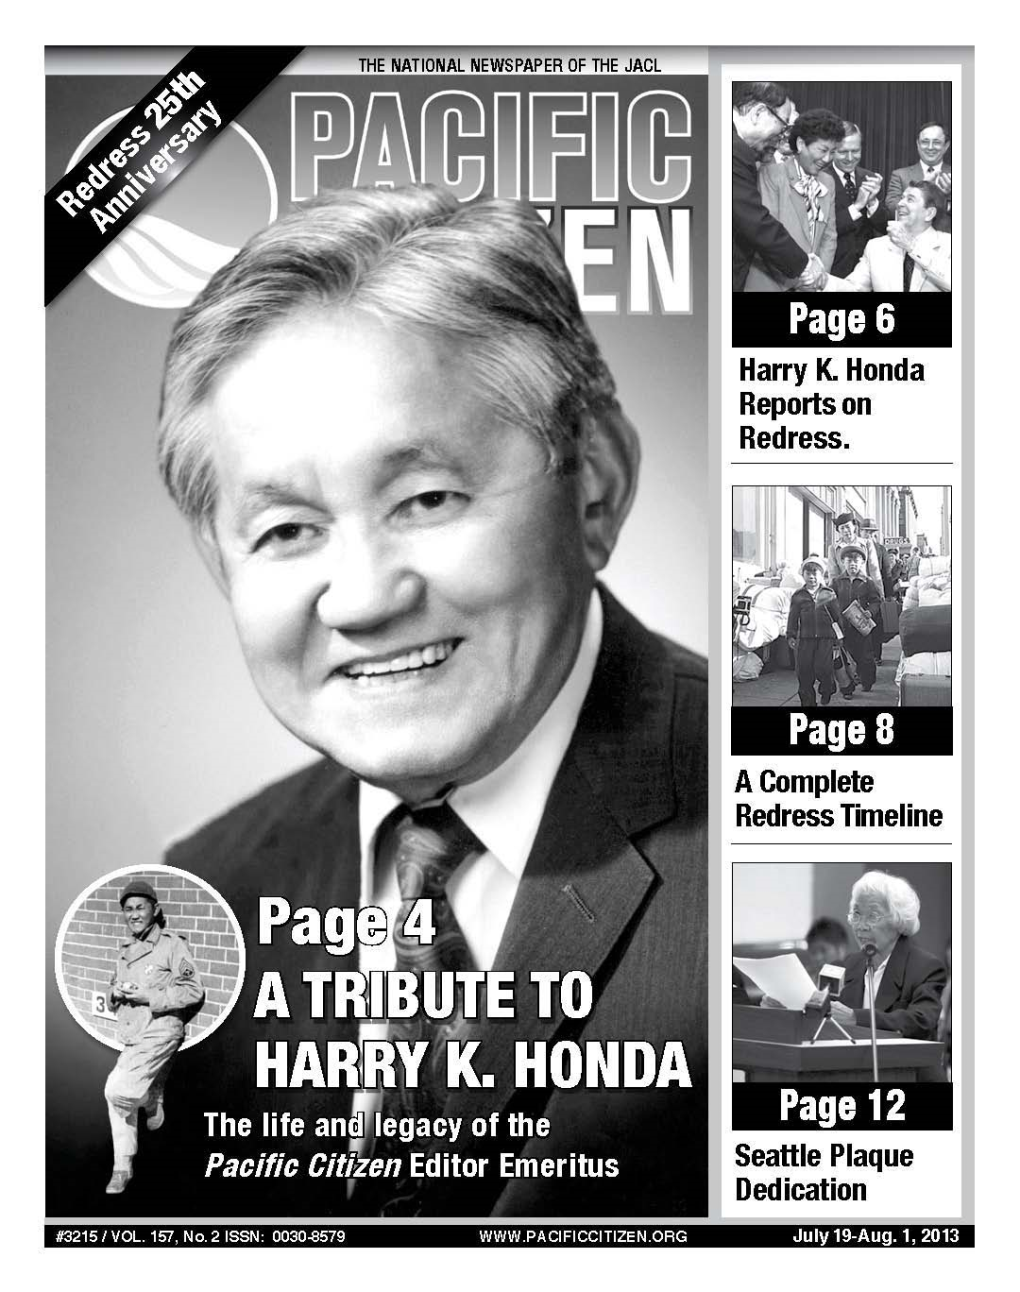 Harry K. Honda Reports on Redress. a Complete